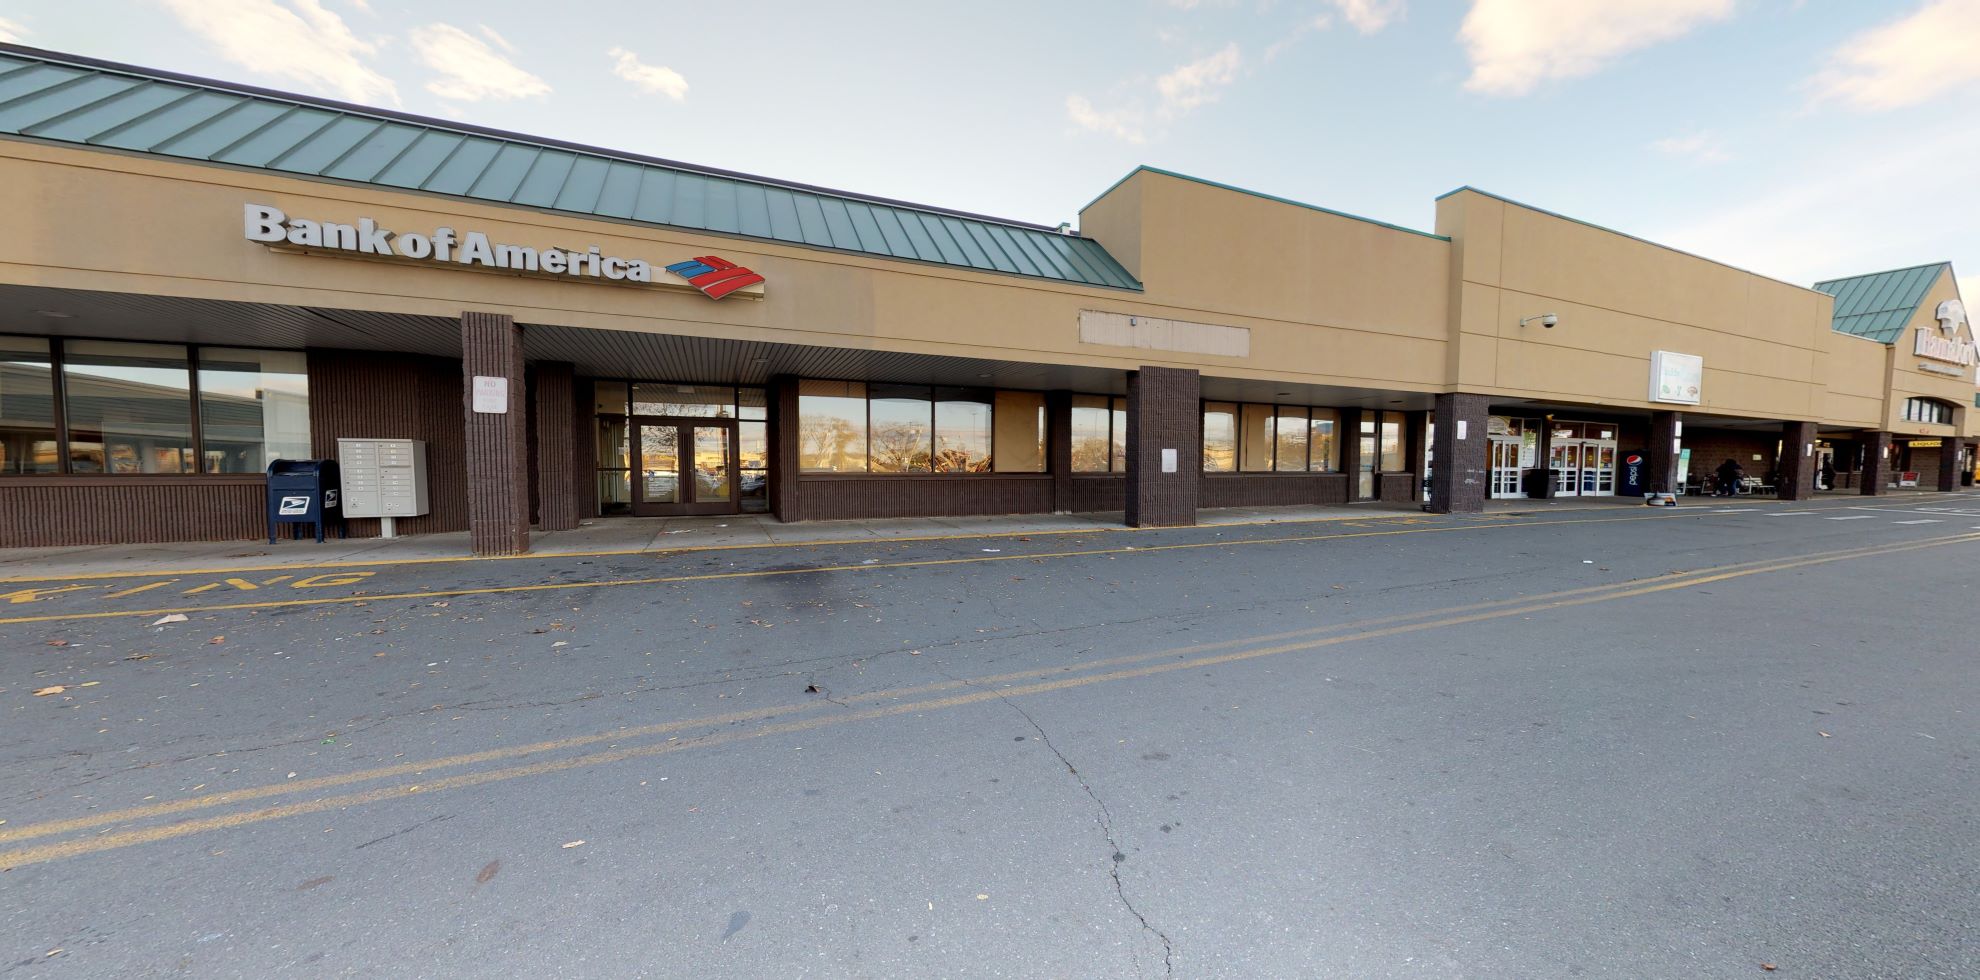 Bank of America financial center with walk-up ATM | 900 Central Ave, Albany, NY 12206